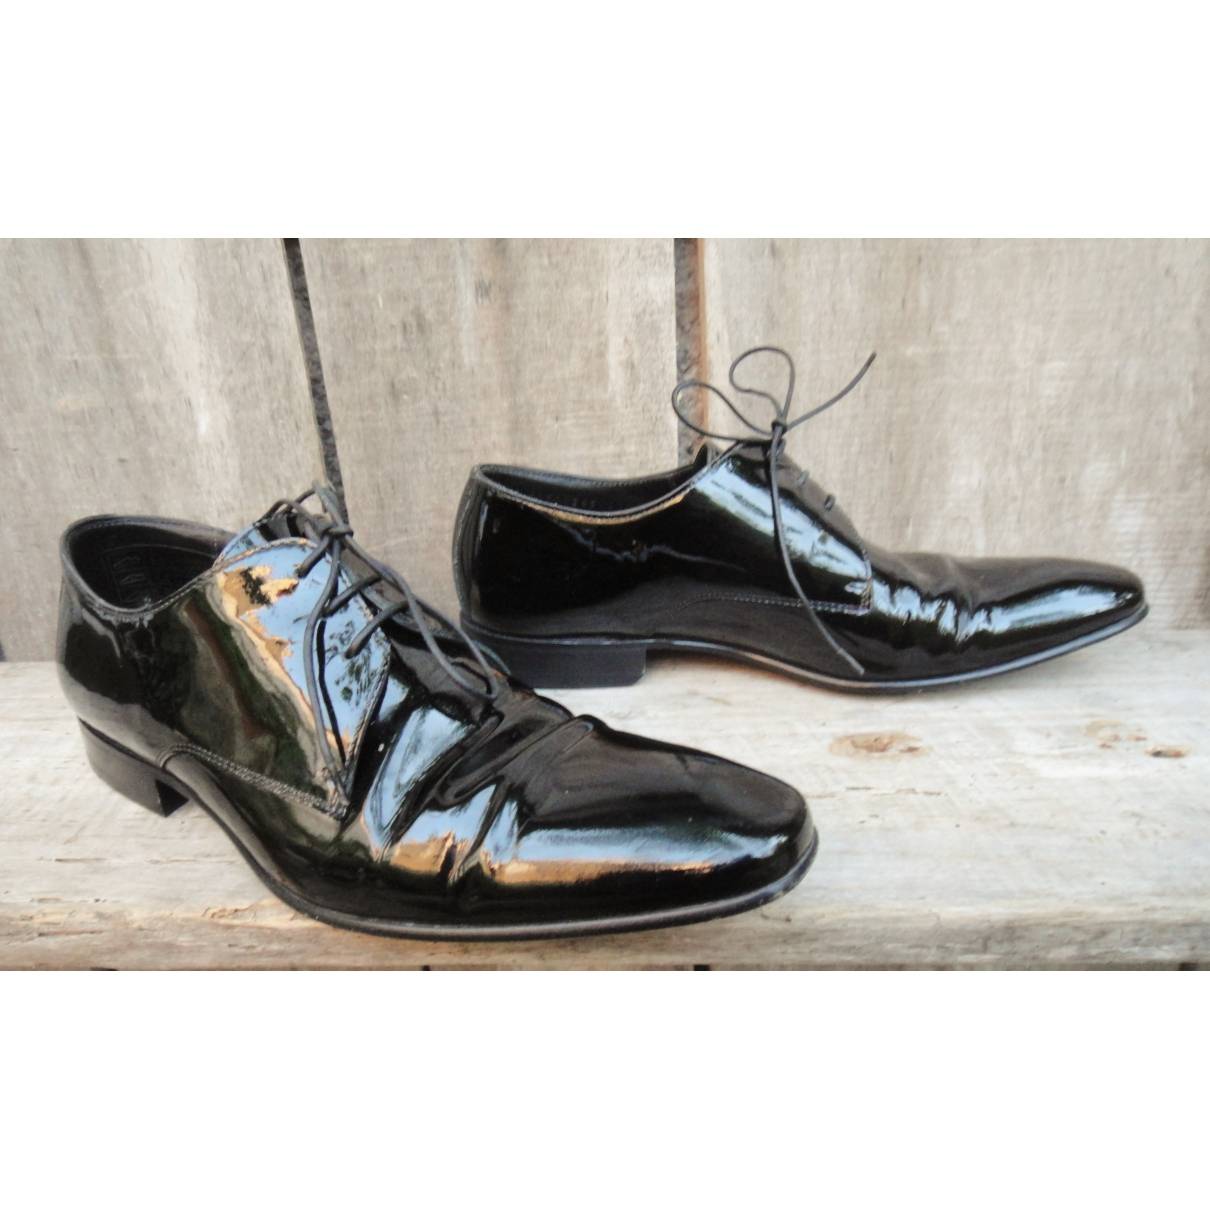 Boss Patent leather lace ups for sale